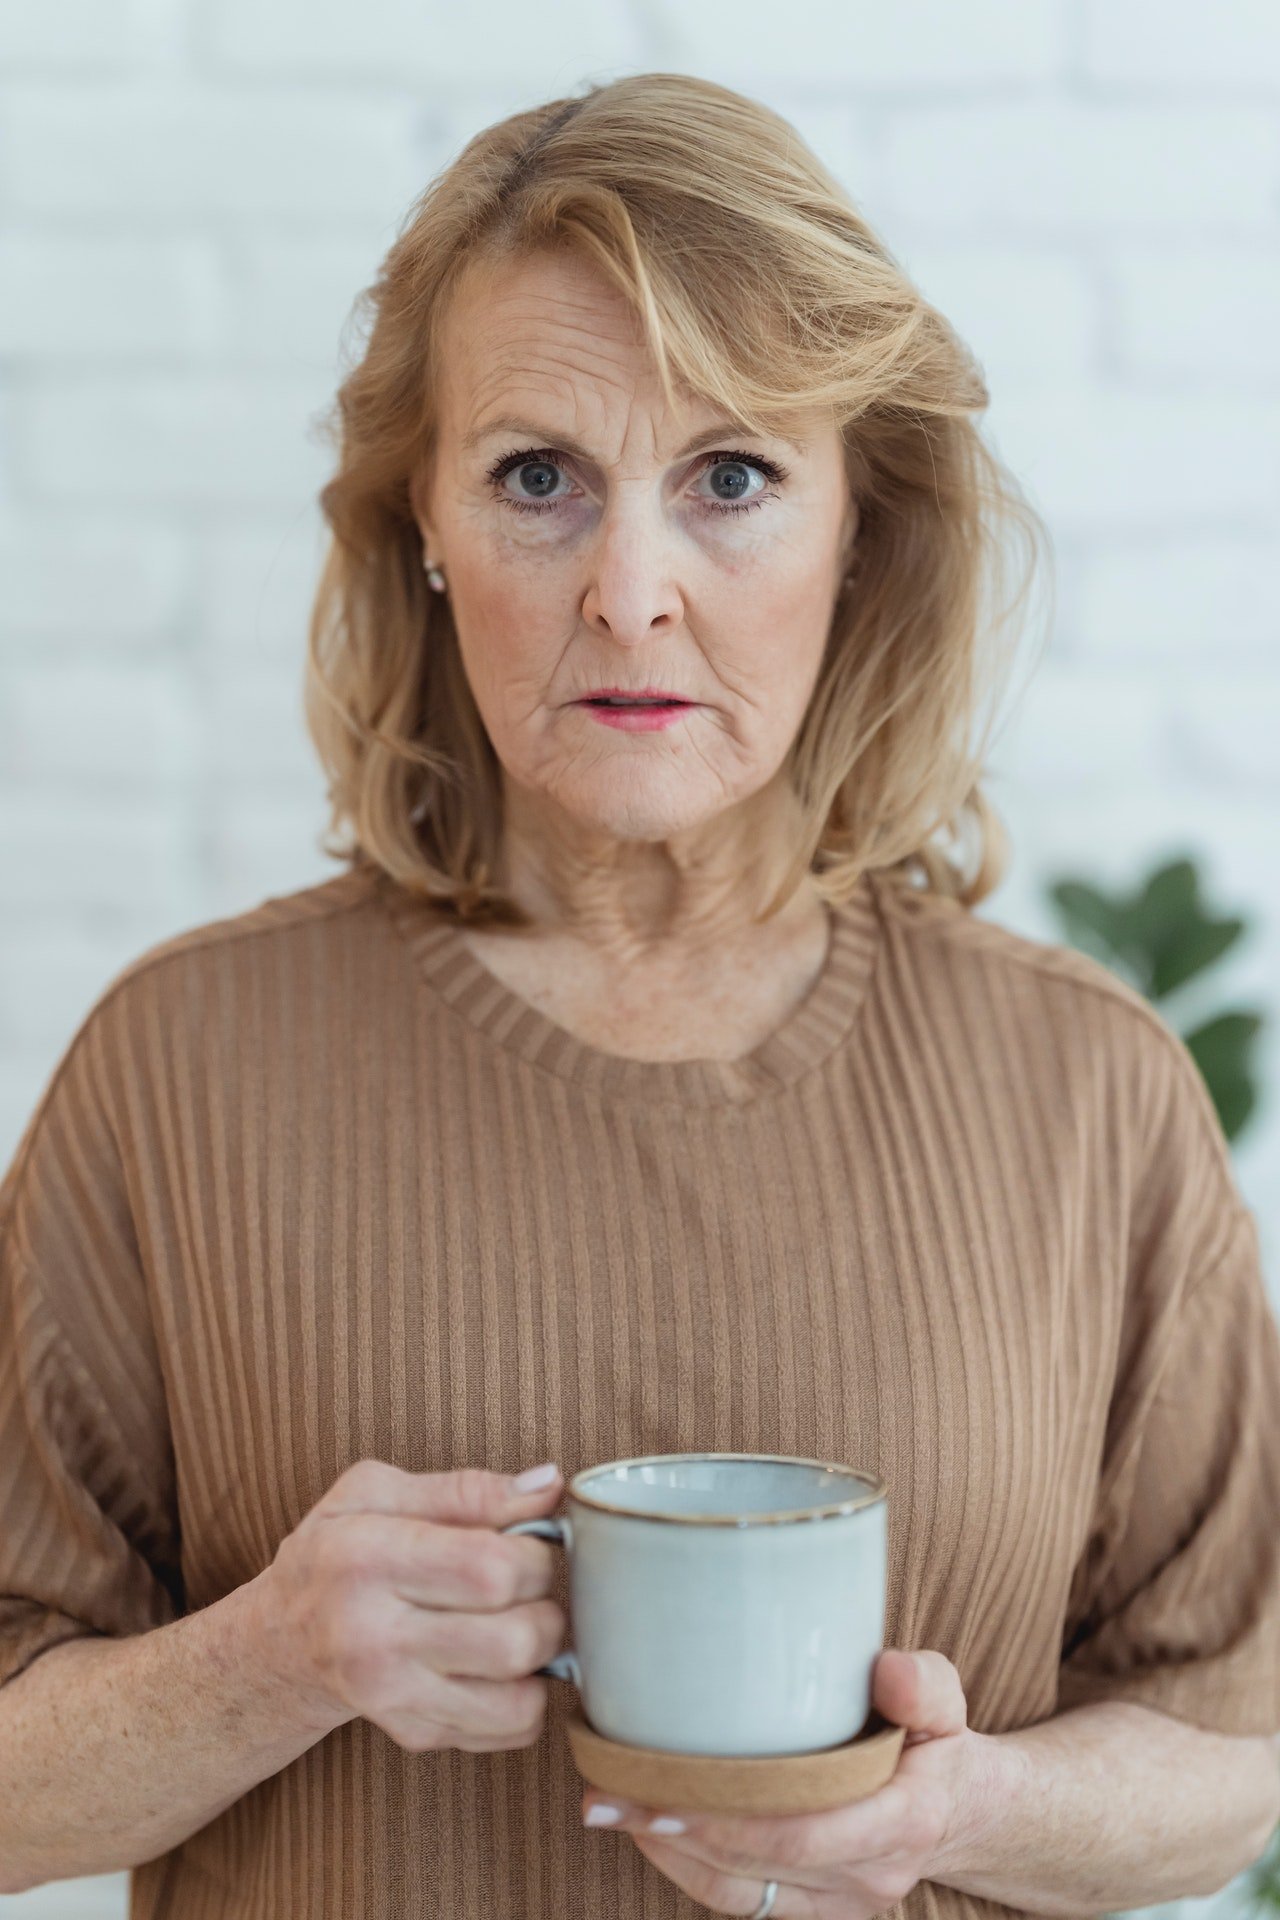 Shocked woman with a tea cup | Source: Pexels